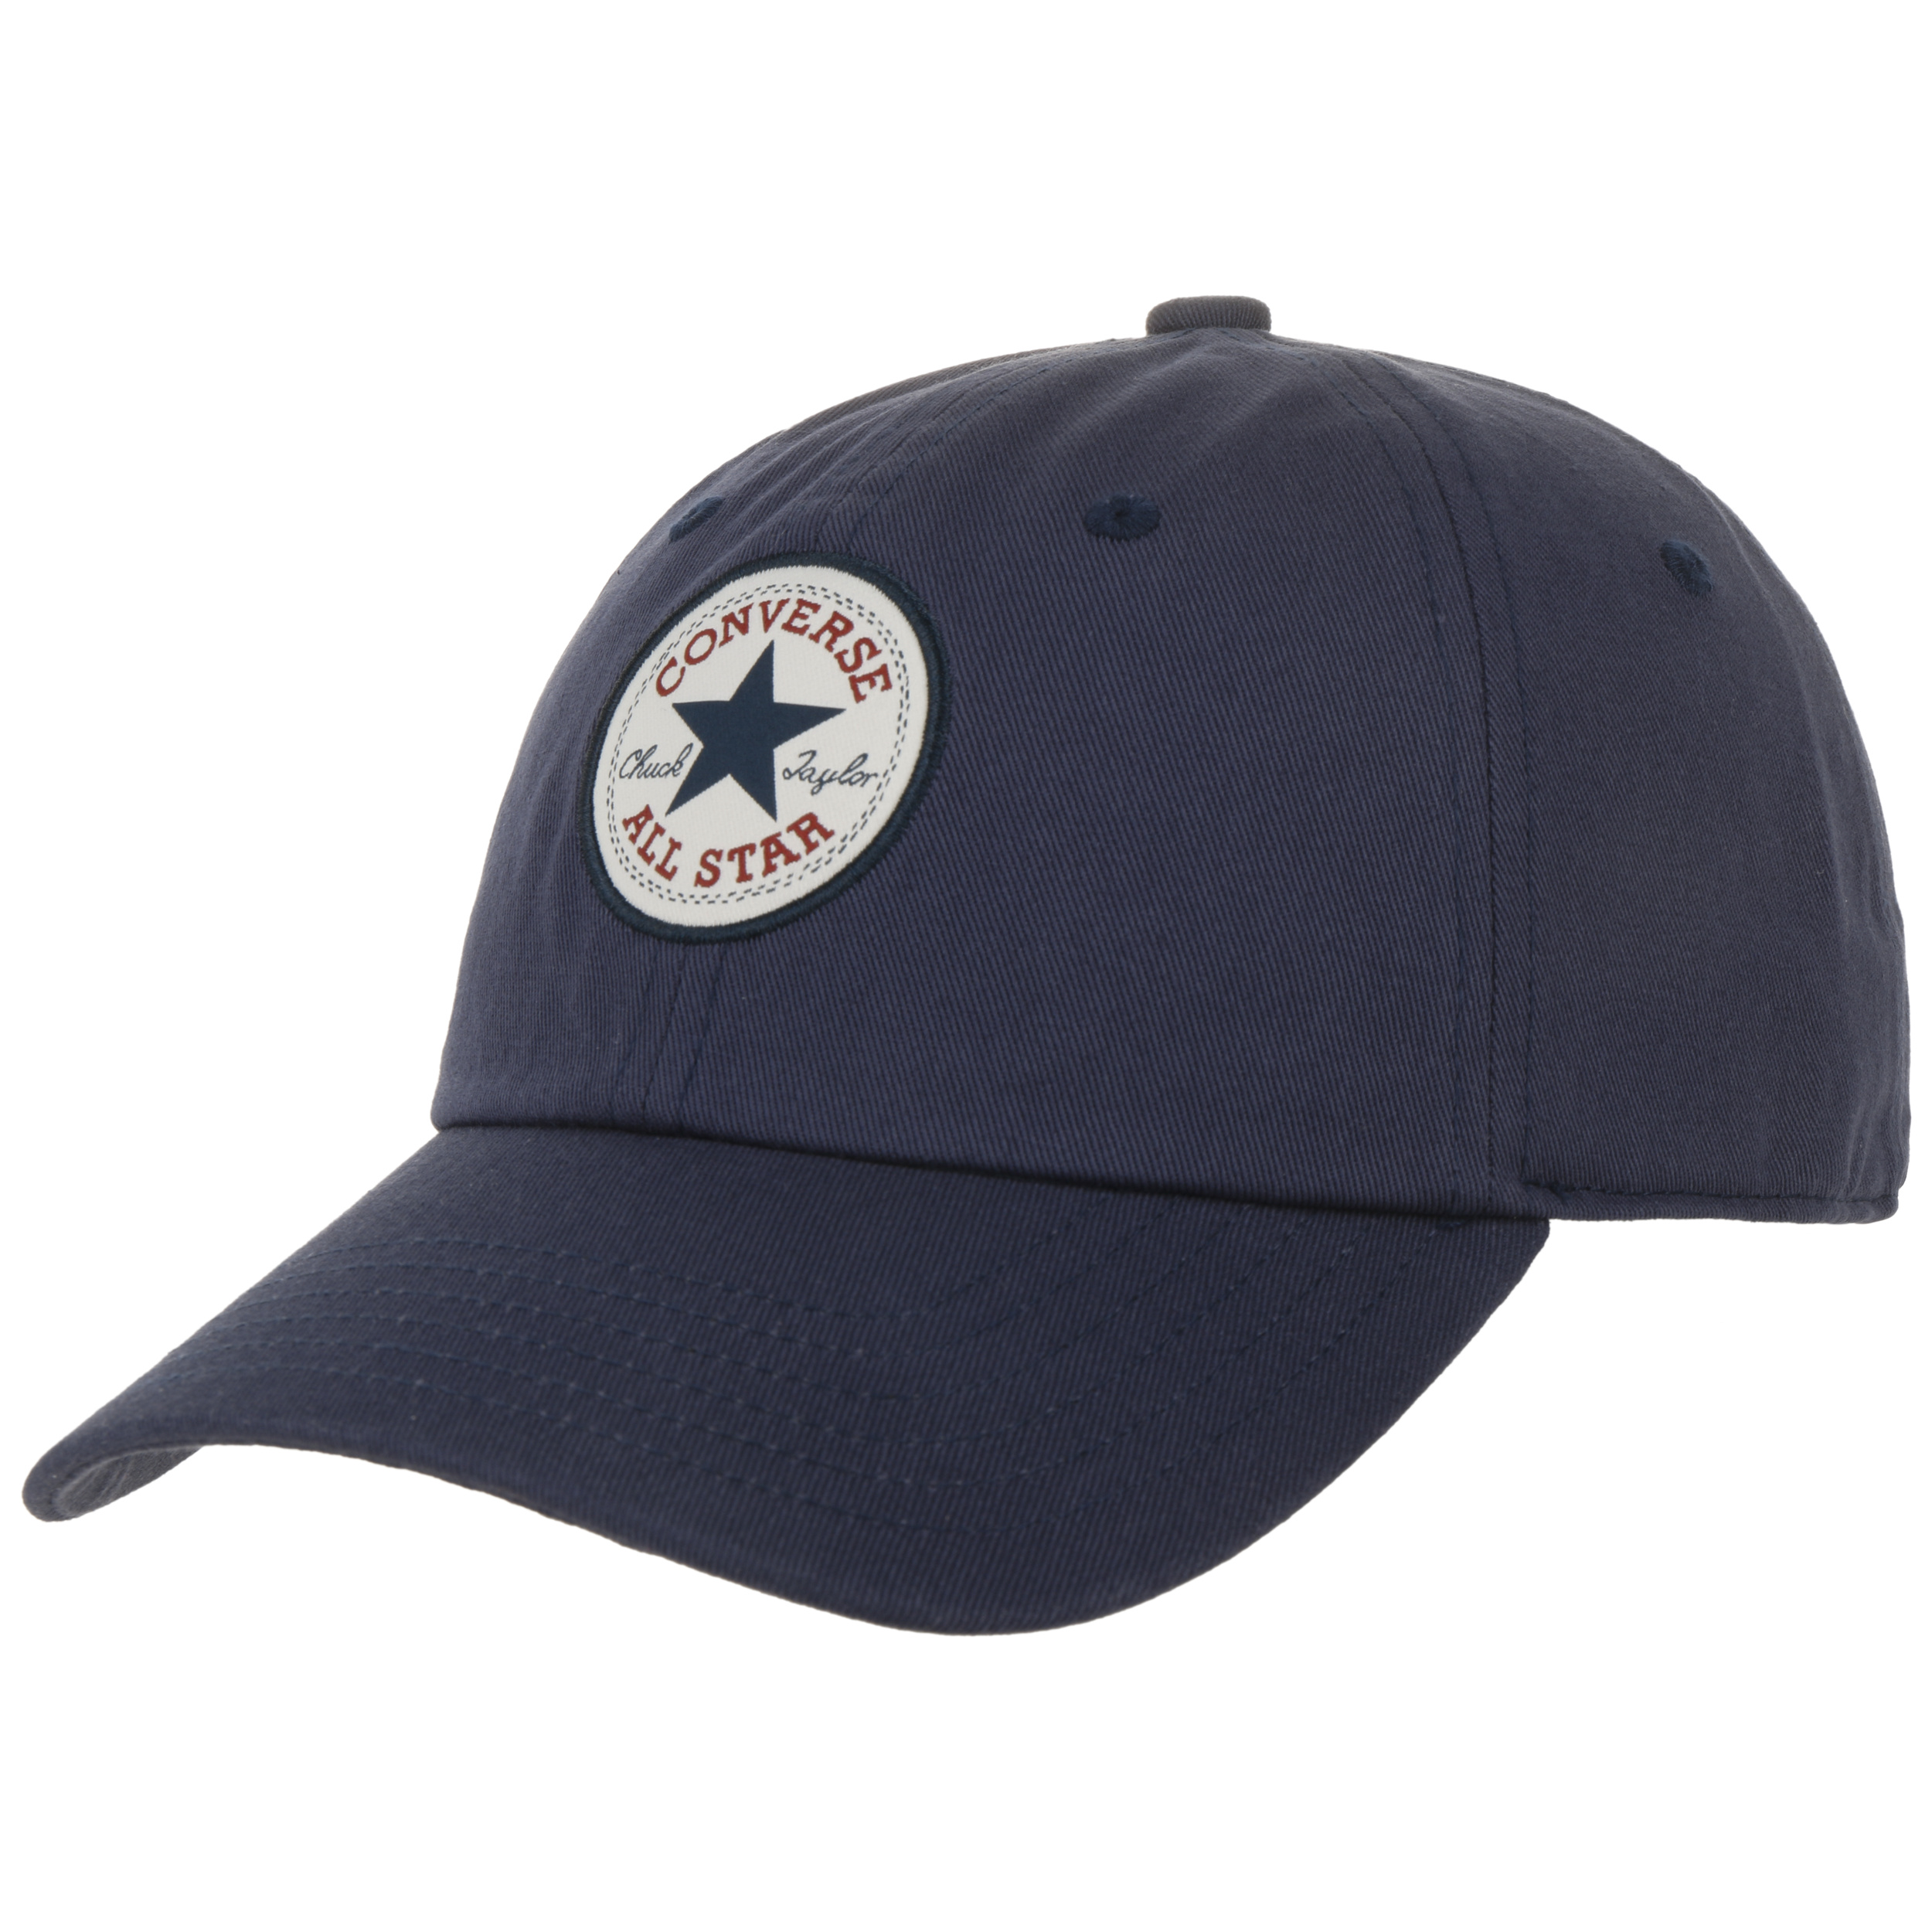 Gorra Tipoff by Converse €